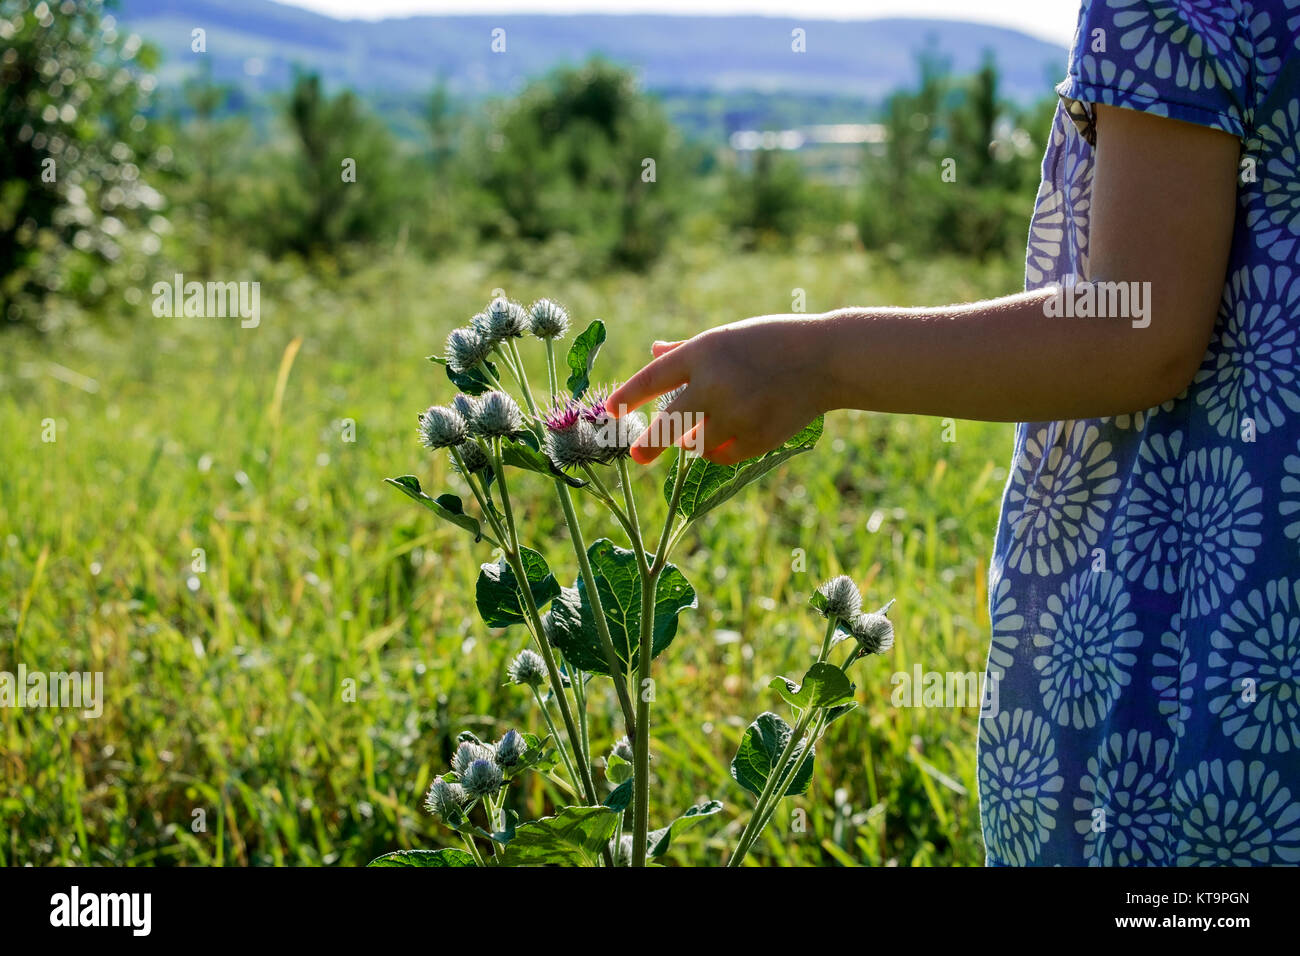 The hand of a little girl tears up the prickly flowers of burdock Stock Photo